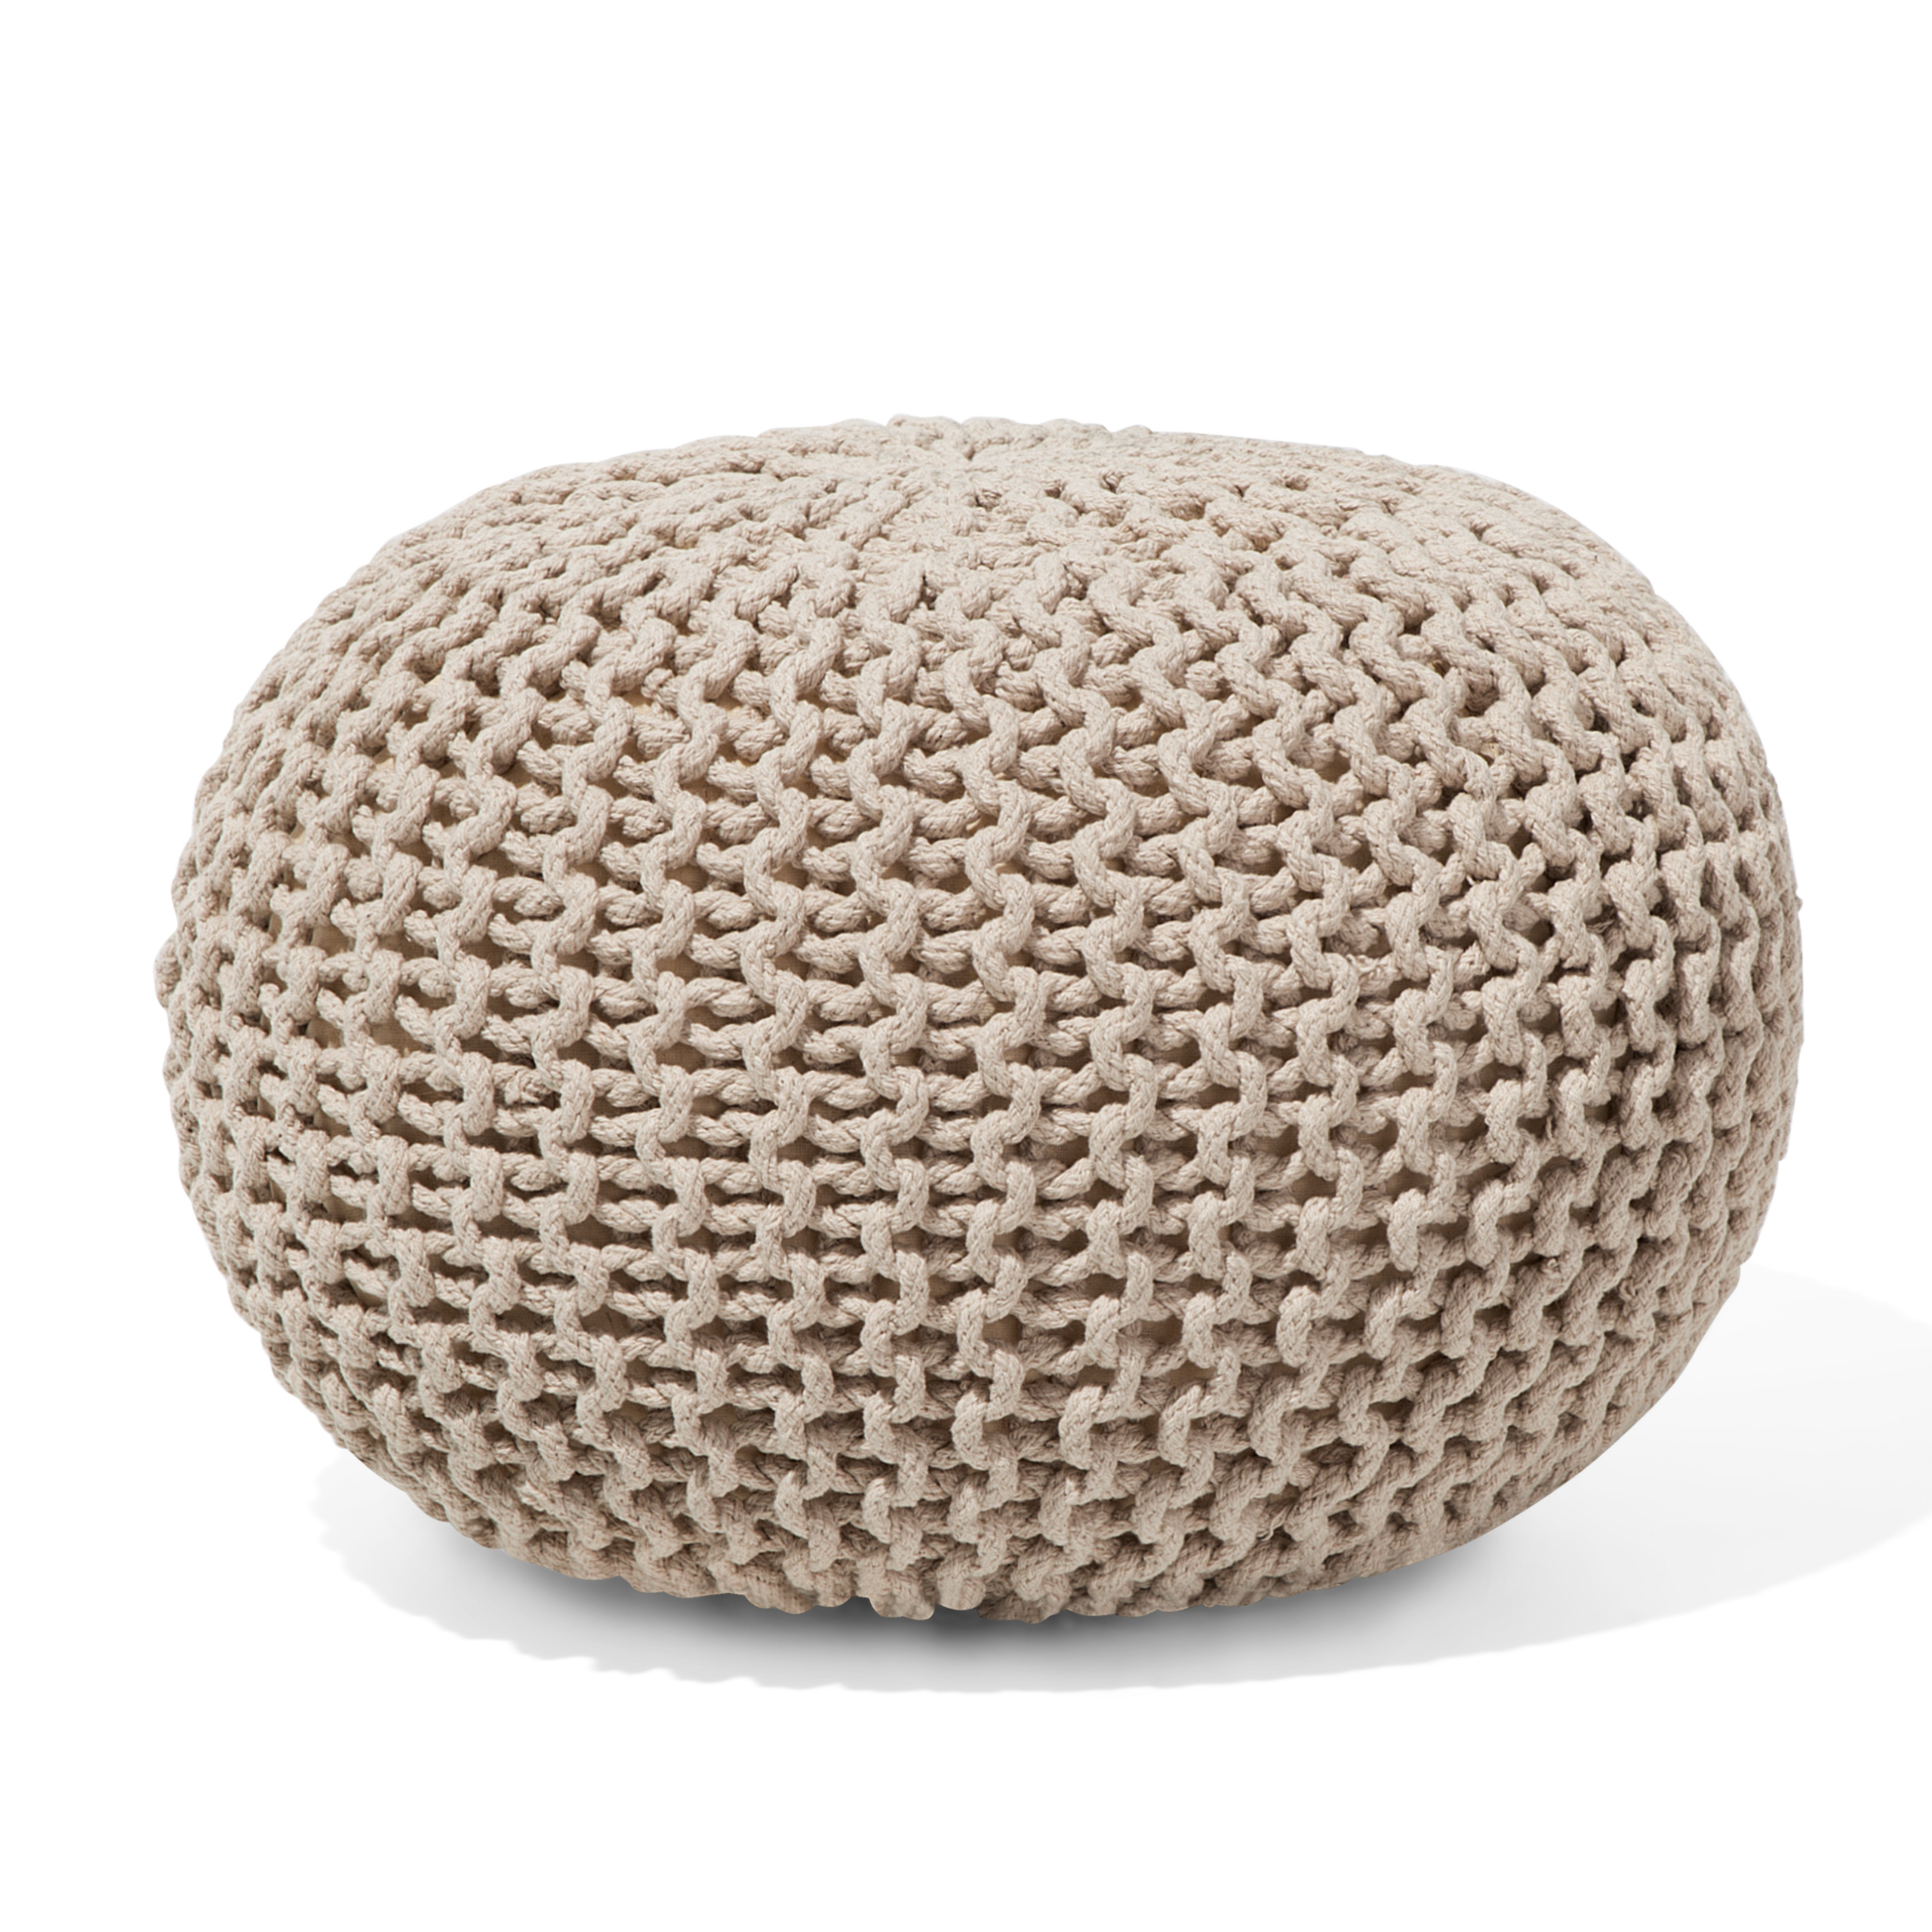 Beliani Pouf Ottoman Beige Knitted Cotton EPS Beads Filling Round Small Footstool 40 x 25 cm